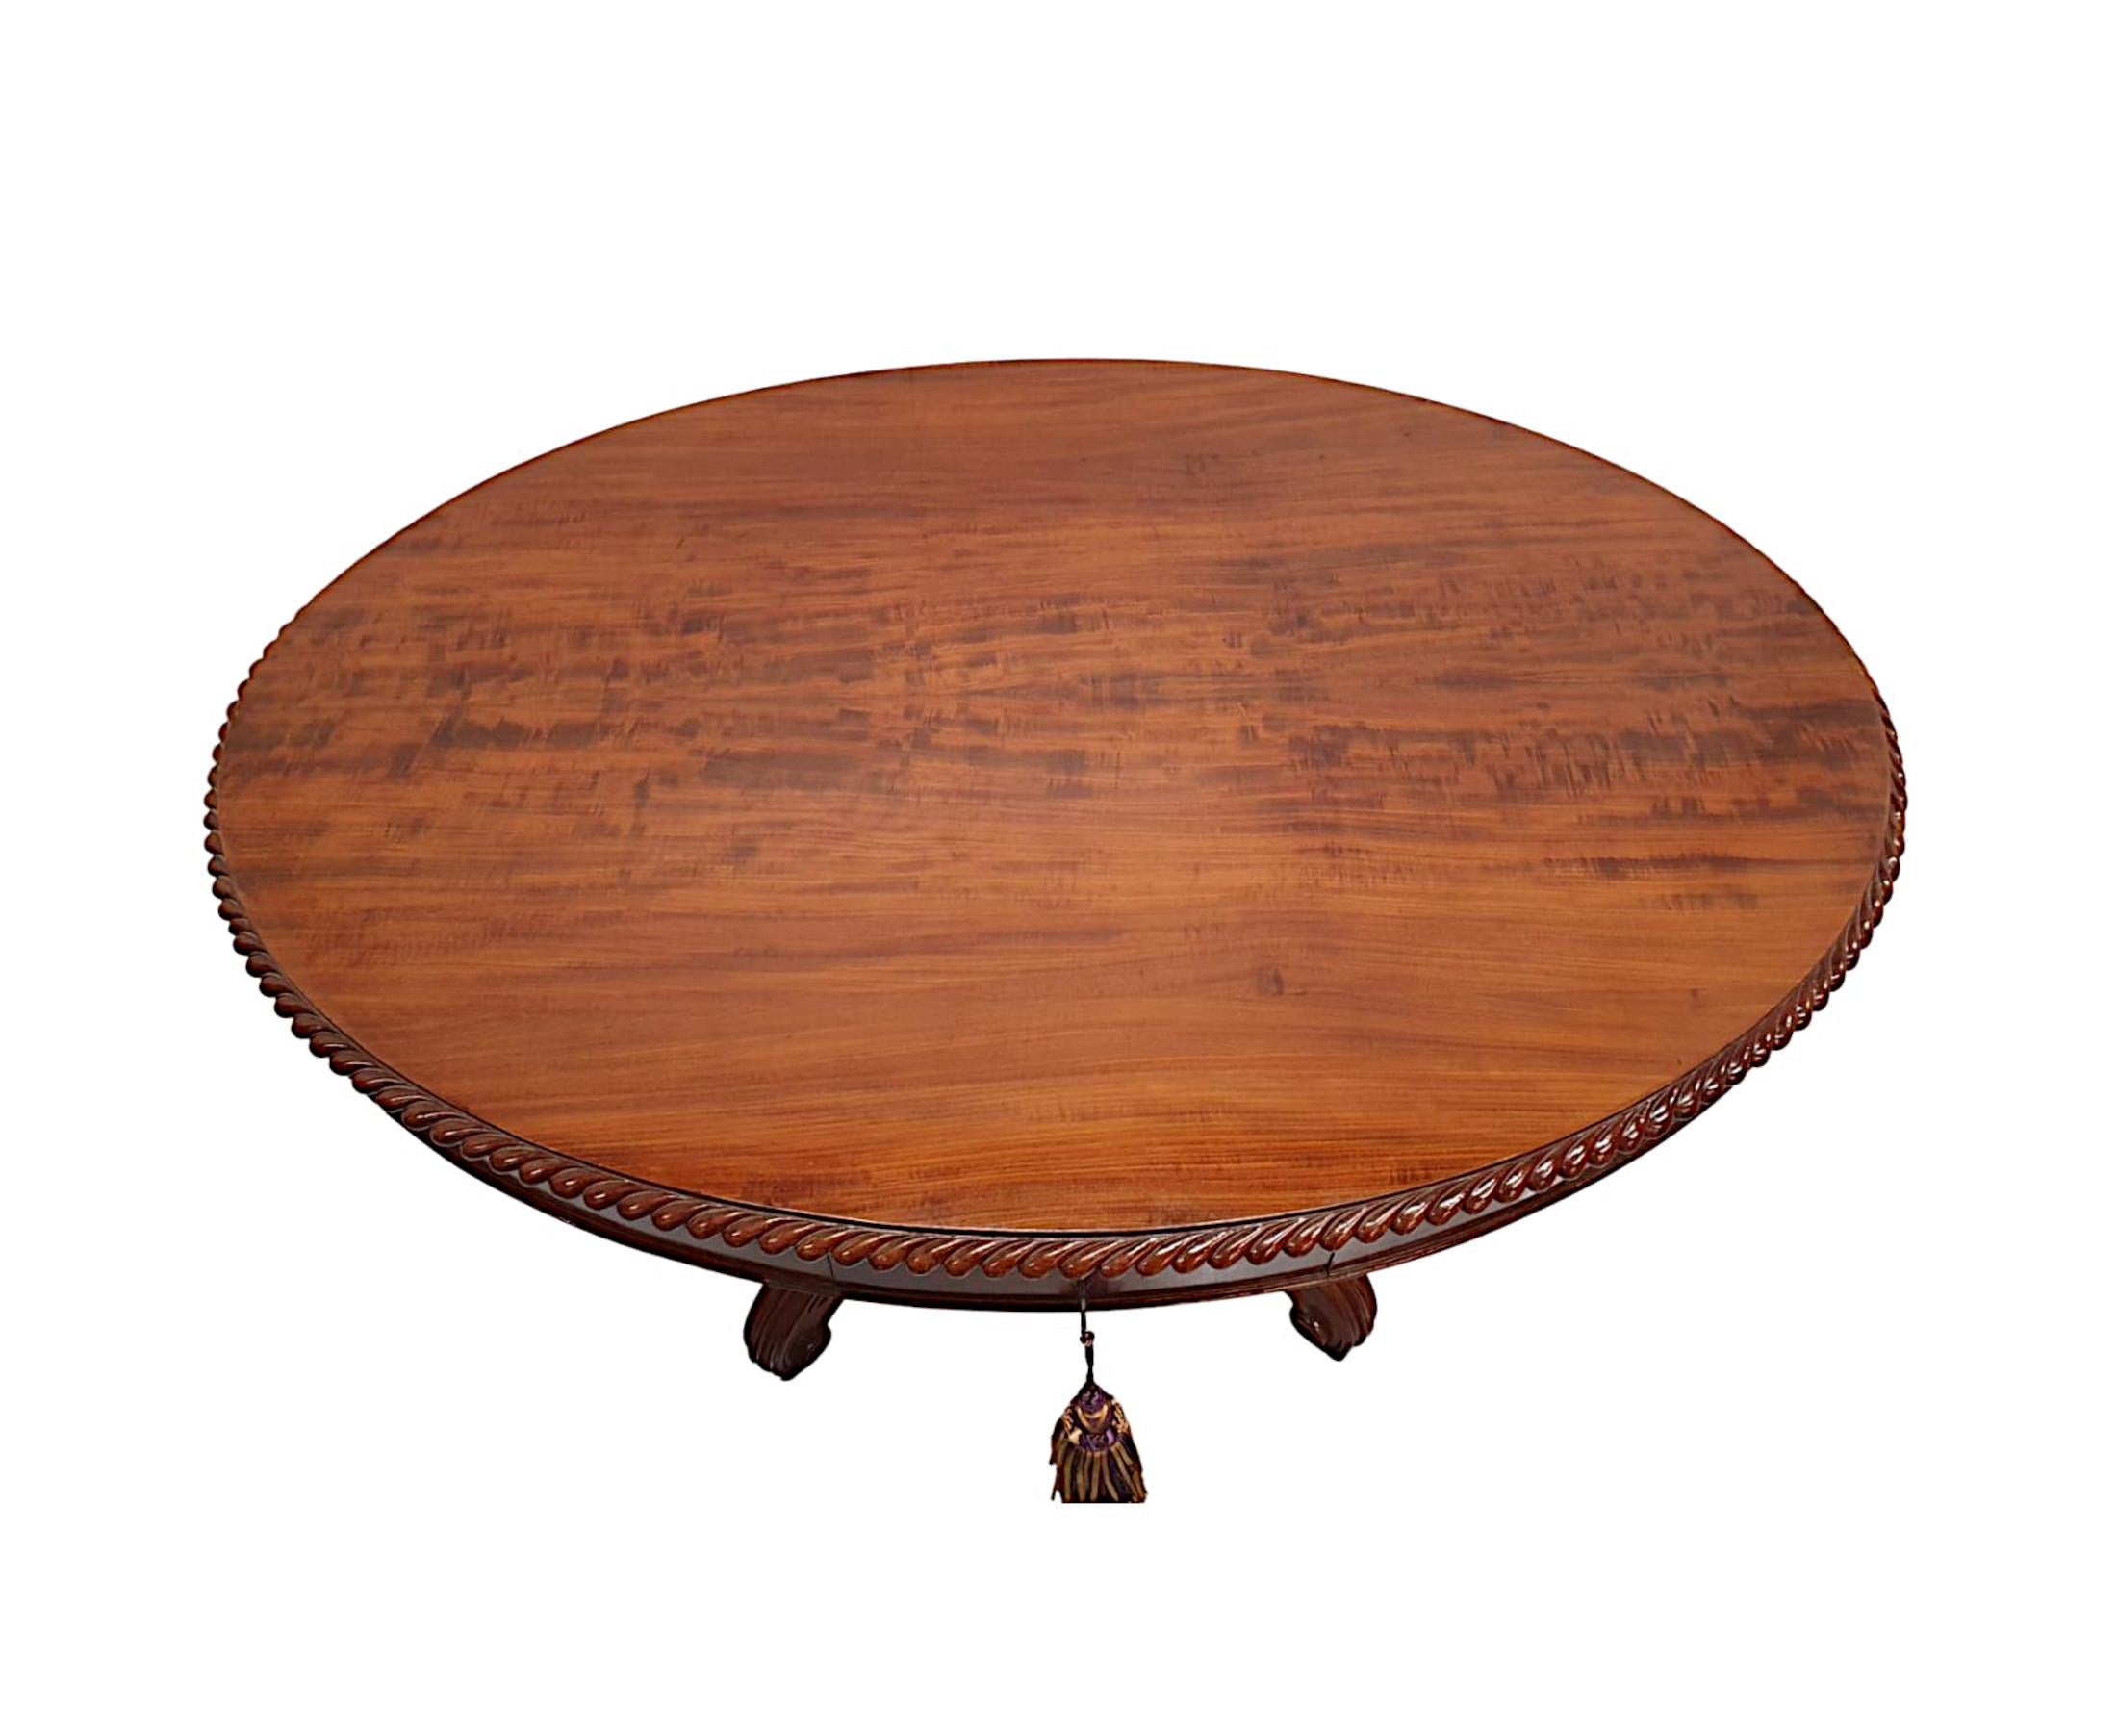 A rare 19th Century figured mahogany drum table, finely hand carved and of exceptional  quality with rich patination and grain.  The well figured, moulded top of oval form with beautifully detailed gadroon edge is raised over a classically simple